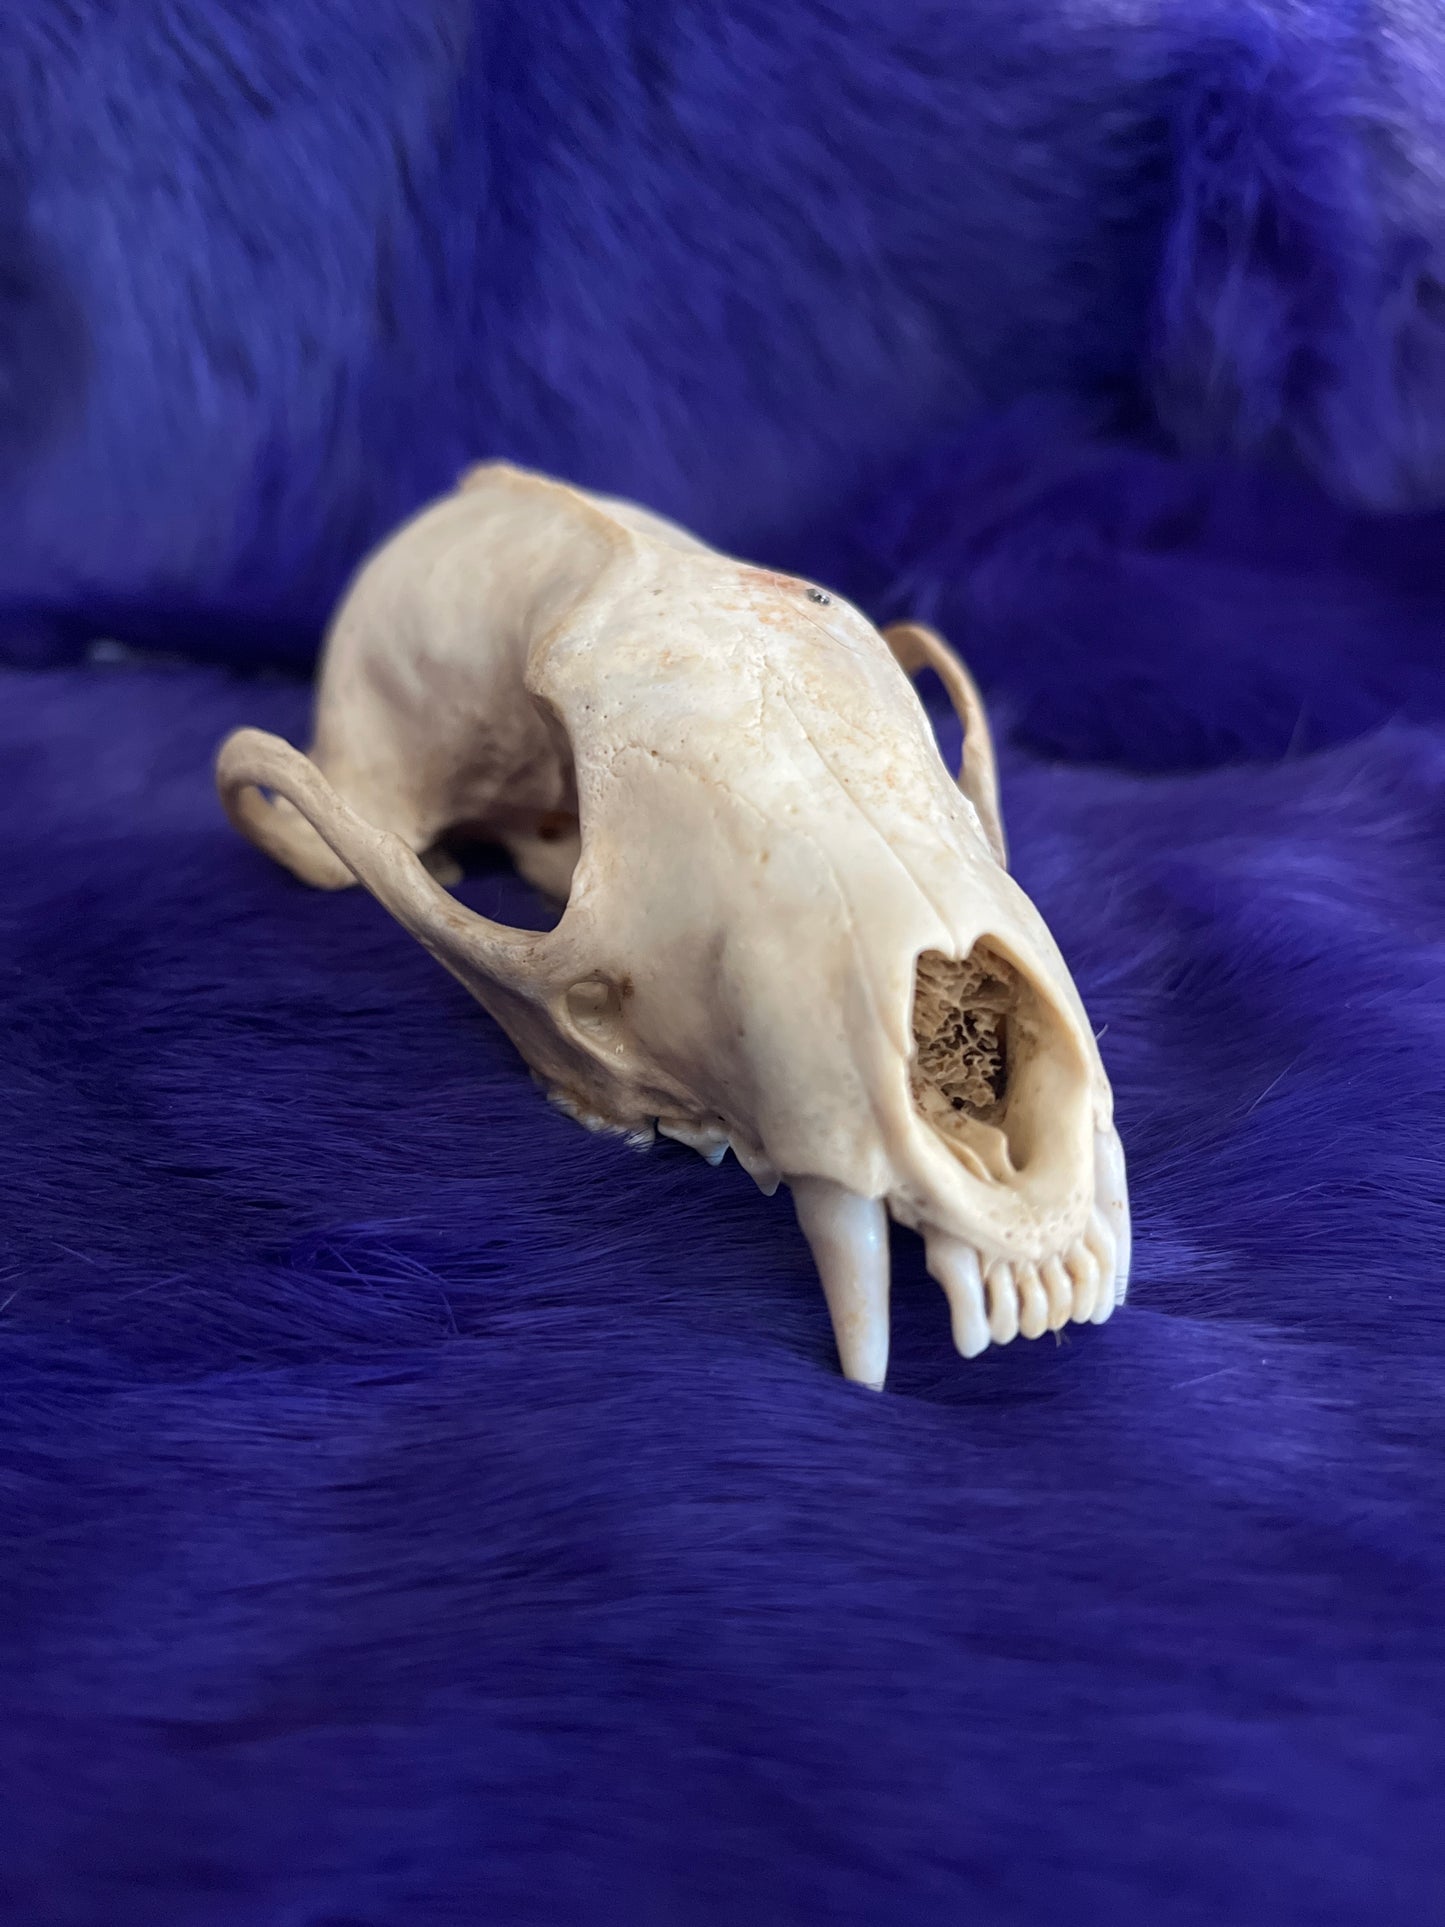 Fisher Skull Without Jaw